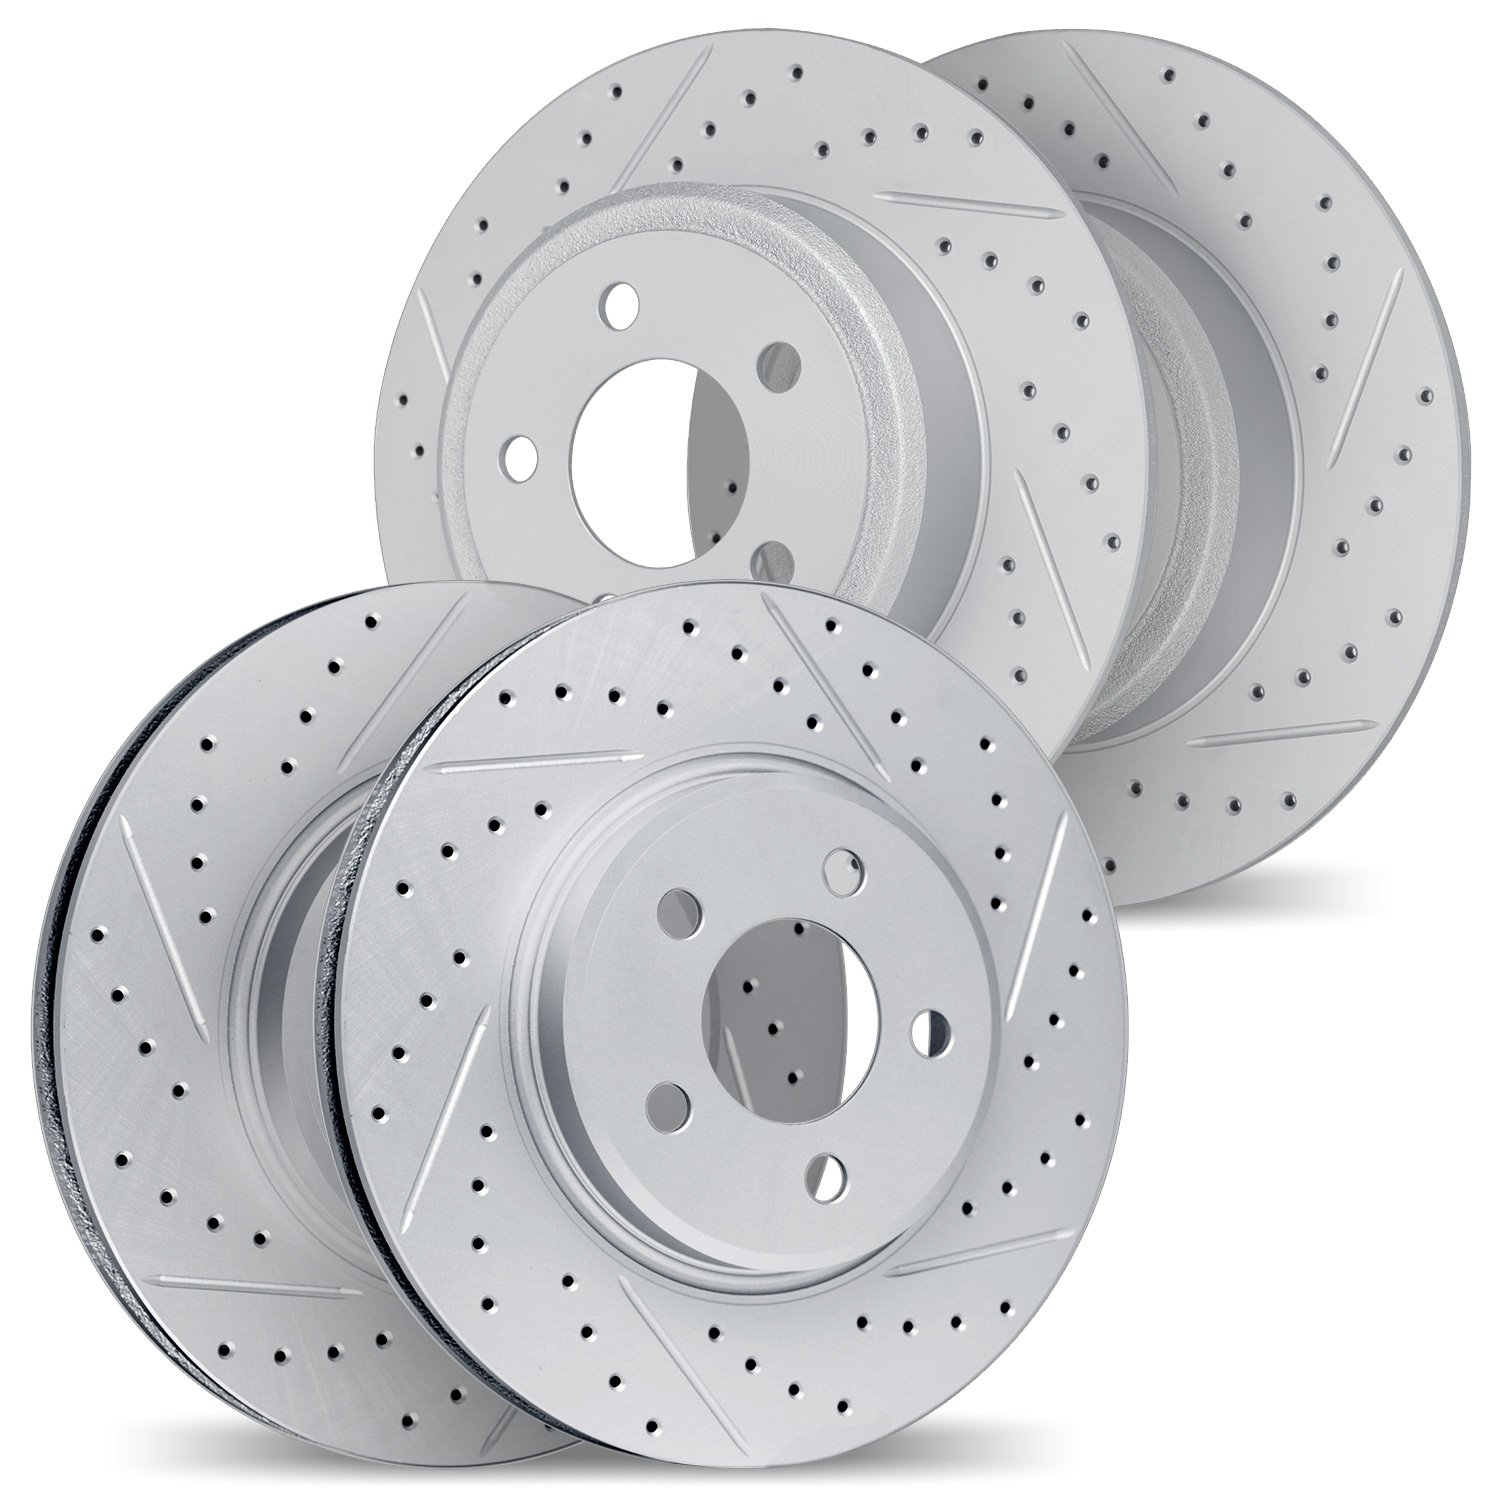 2004-03067 Geoperformance Drilled/Slotted Brake Rotors, 2017-2019 Kia/Hyundai/Genesis, Position: Front and Rear